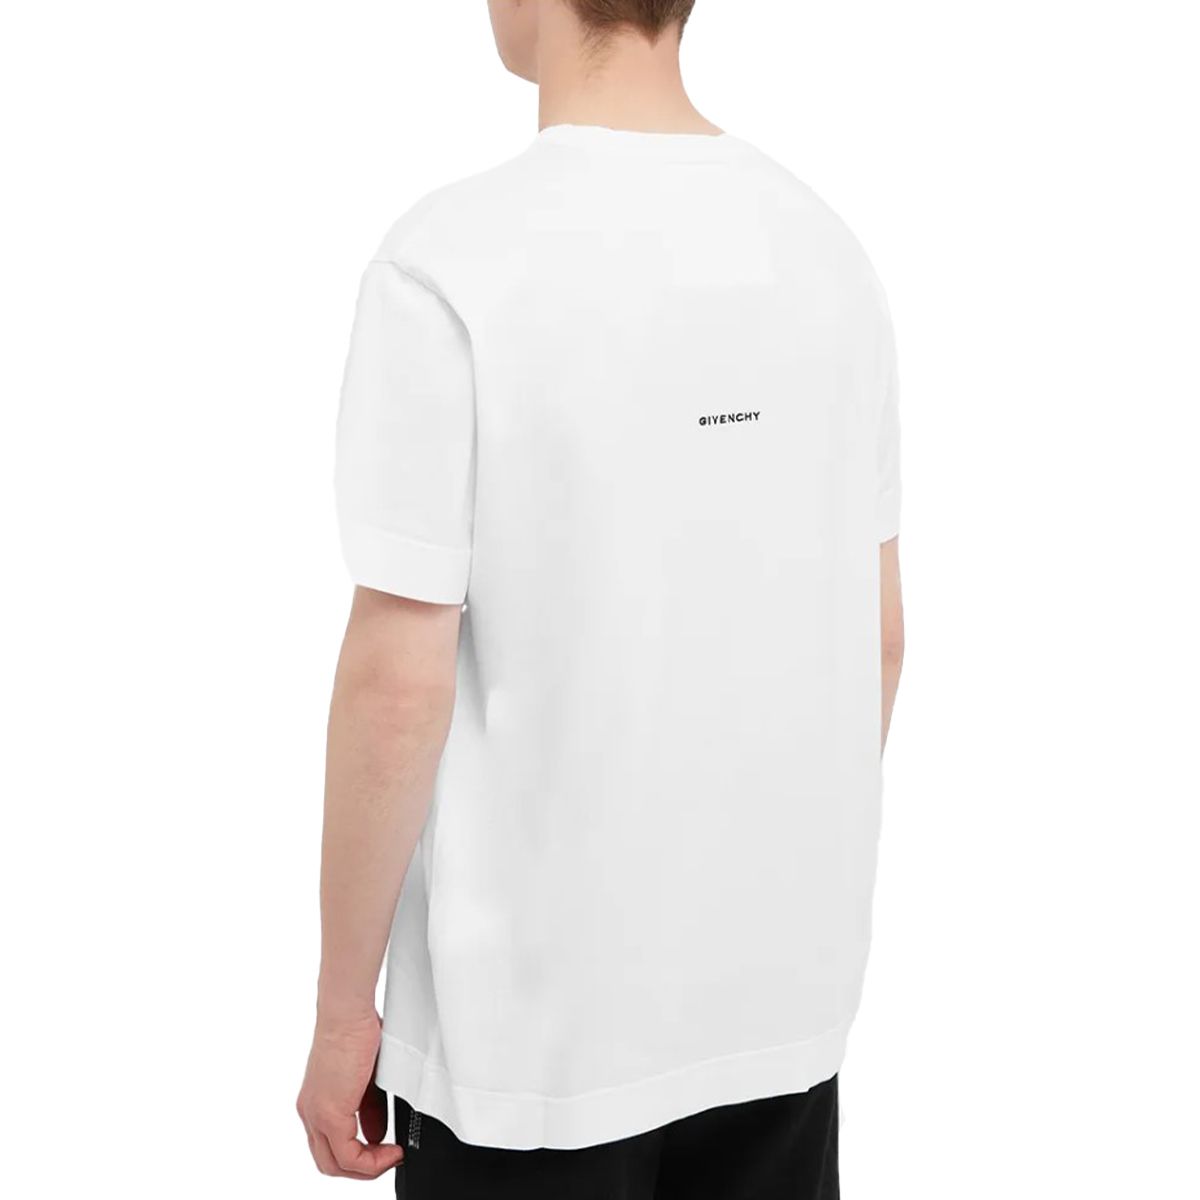 Contrast 4G Embroidery T-Shirt